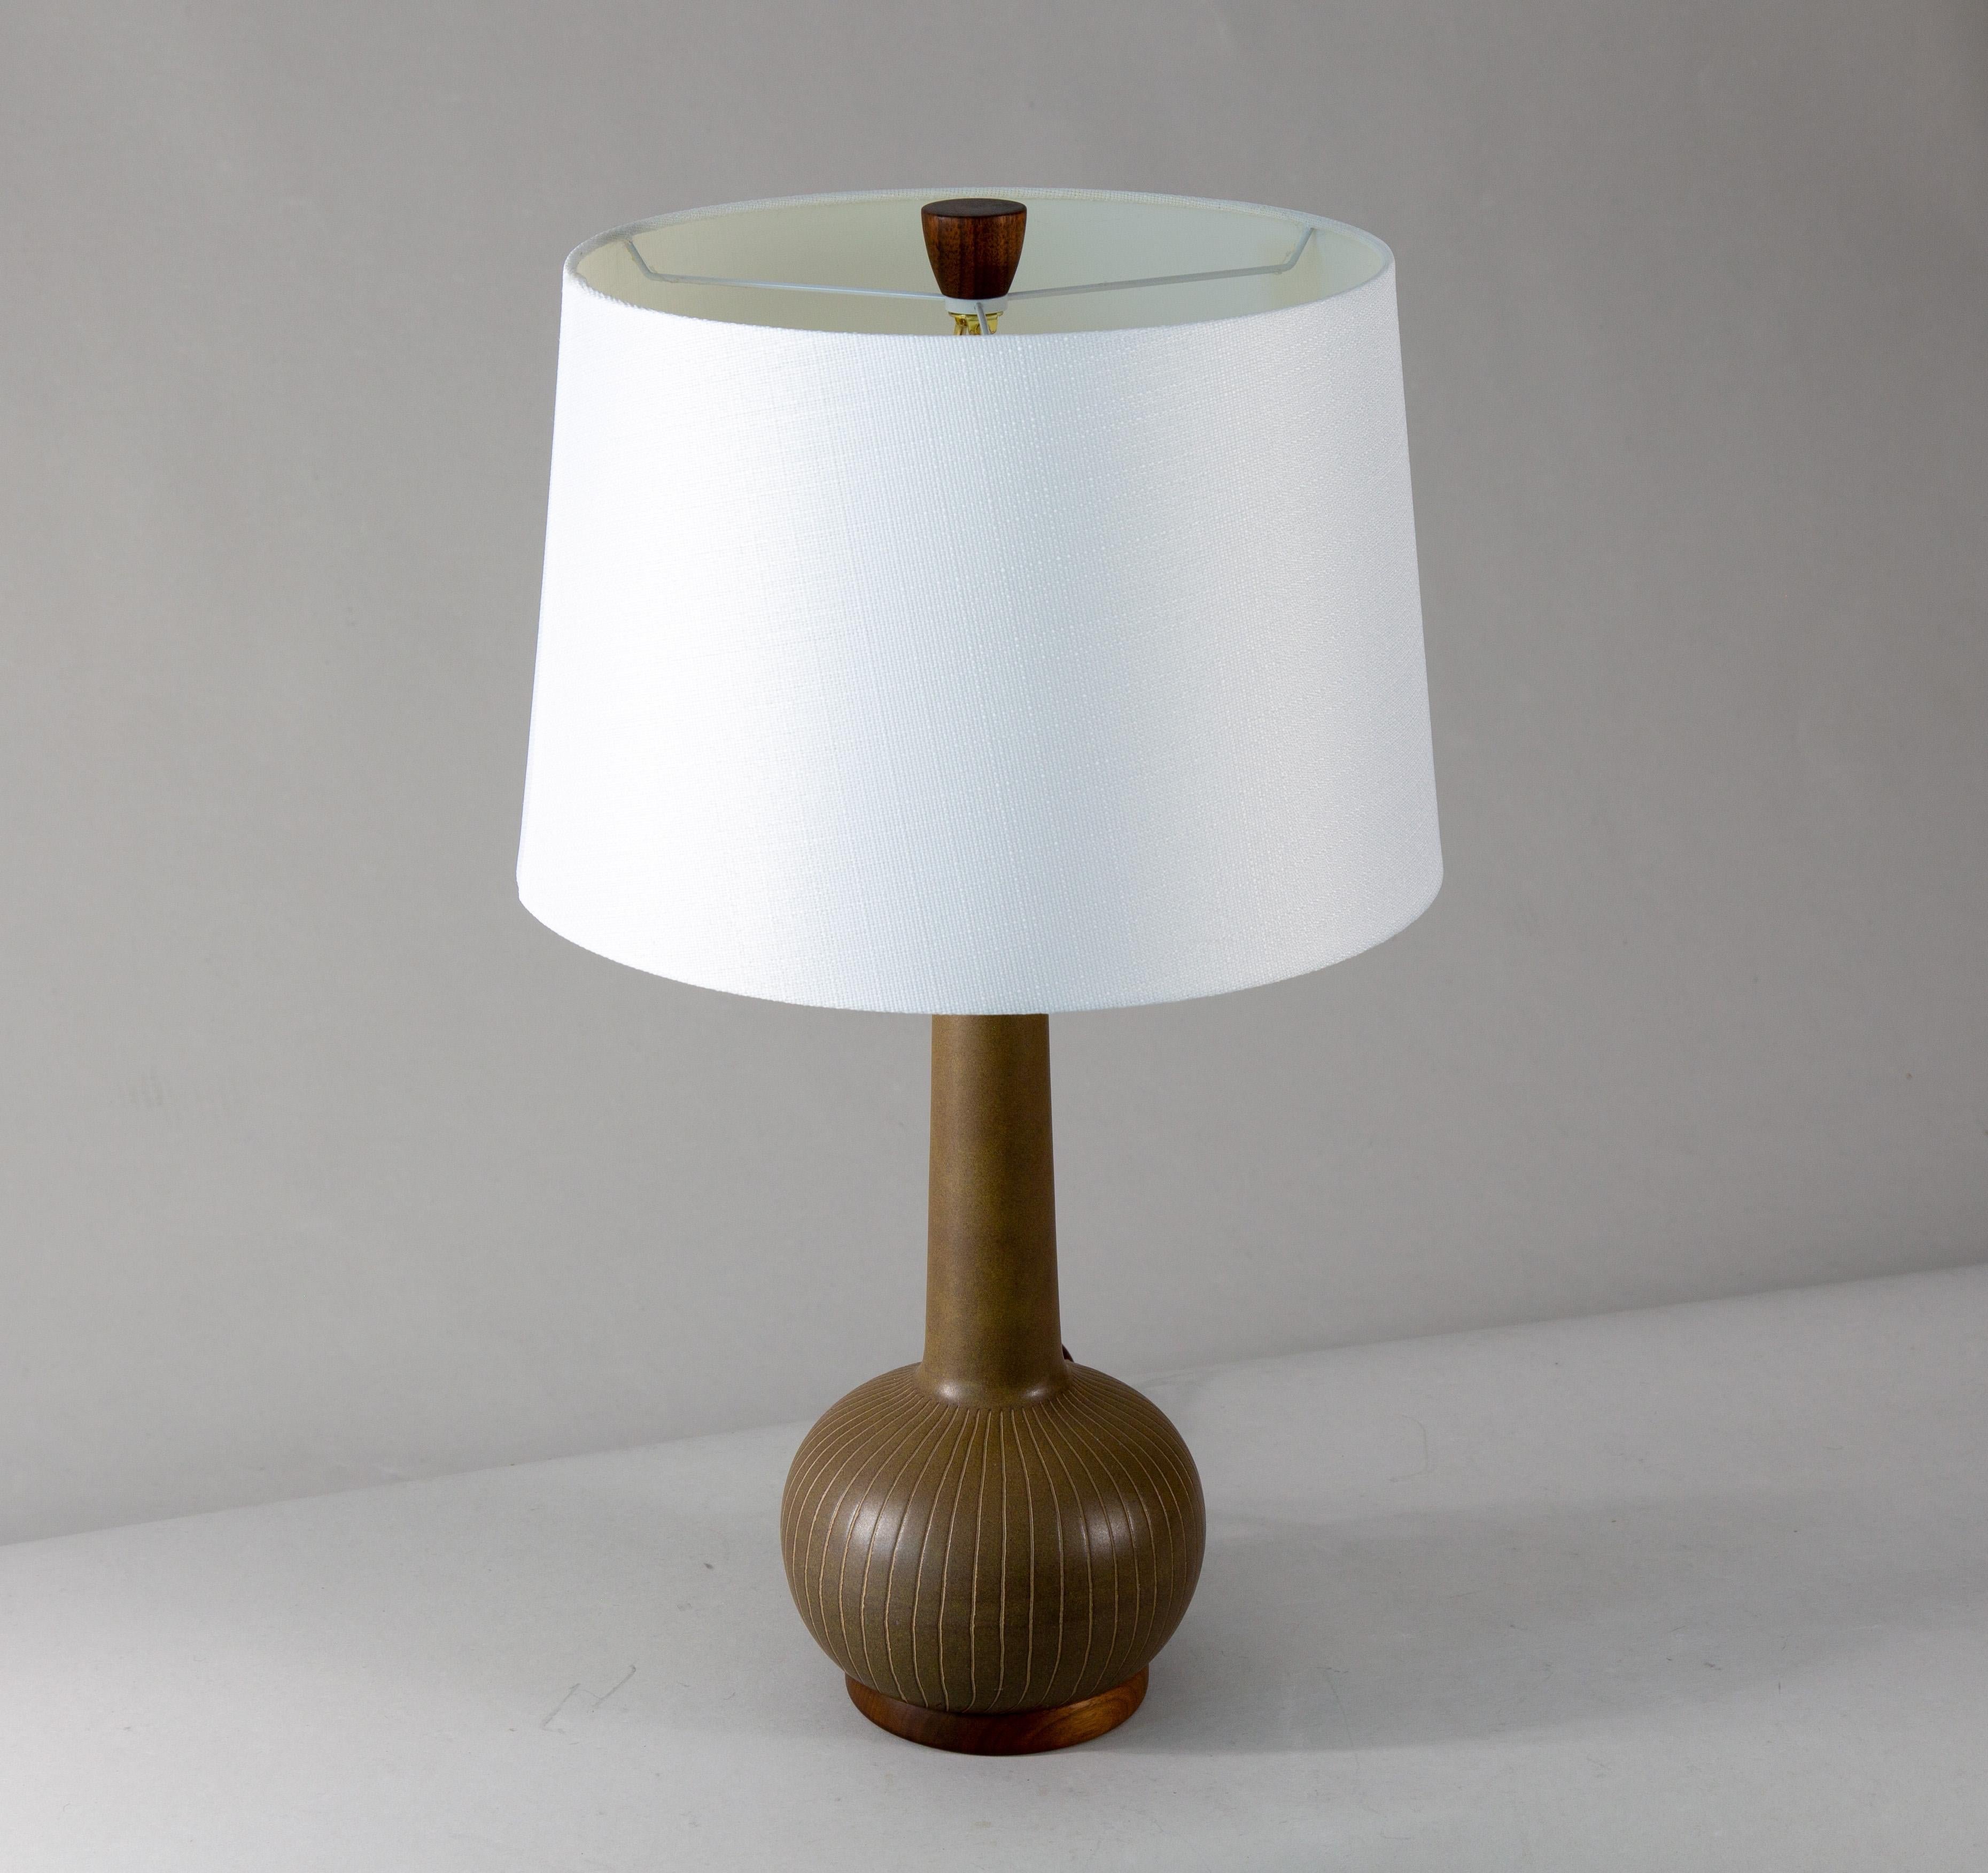 A highly collectable 1960s table lamp designed by Jane and Gordon Martz of Marshall Studios in Veedersburg Indiana. These lamps are highly sought after and are showing up in designs all over the world. Blending sophistication and modern these lamps